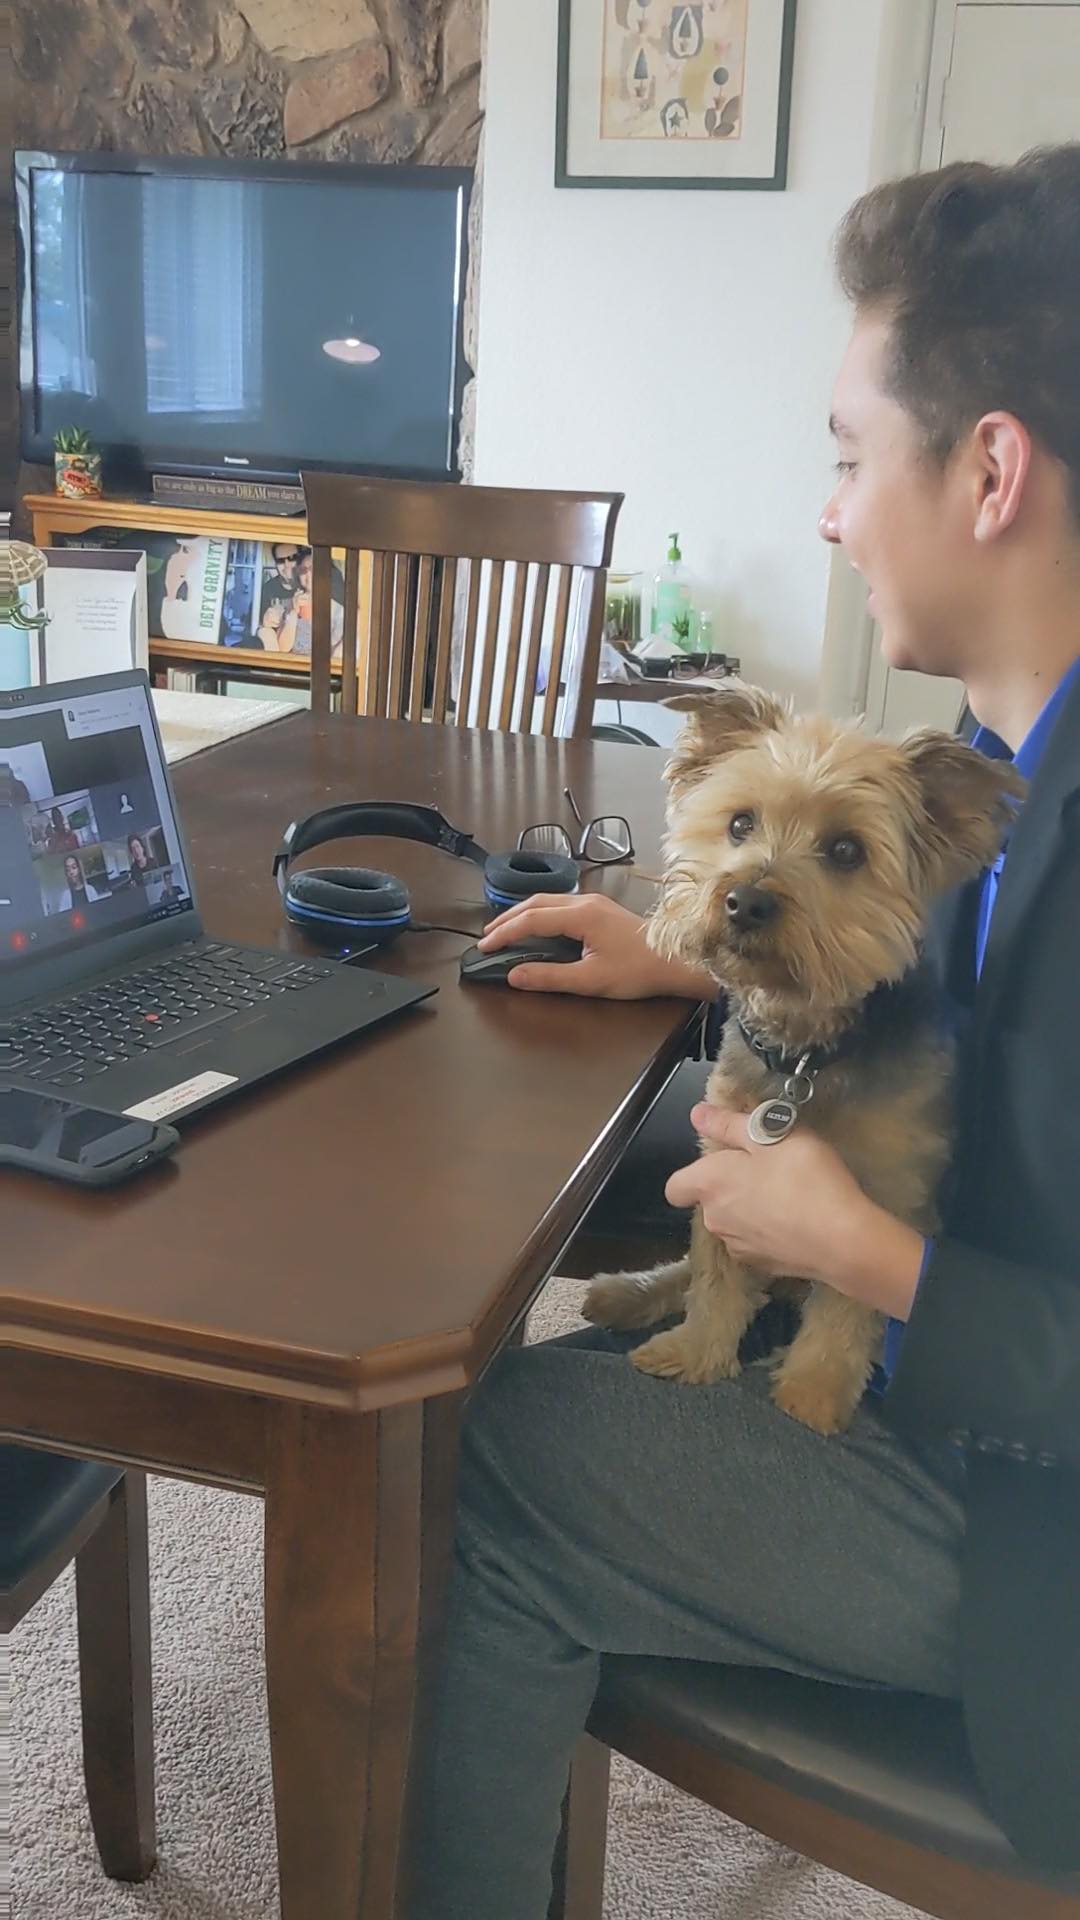 Jonathan on a Webex call with his dog in his lap.